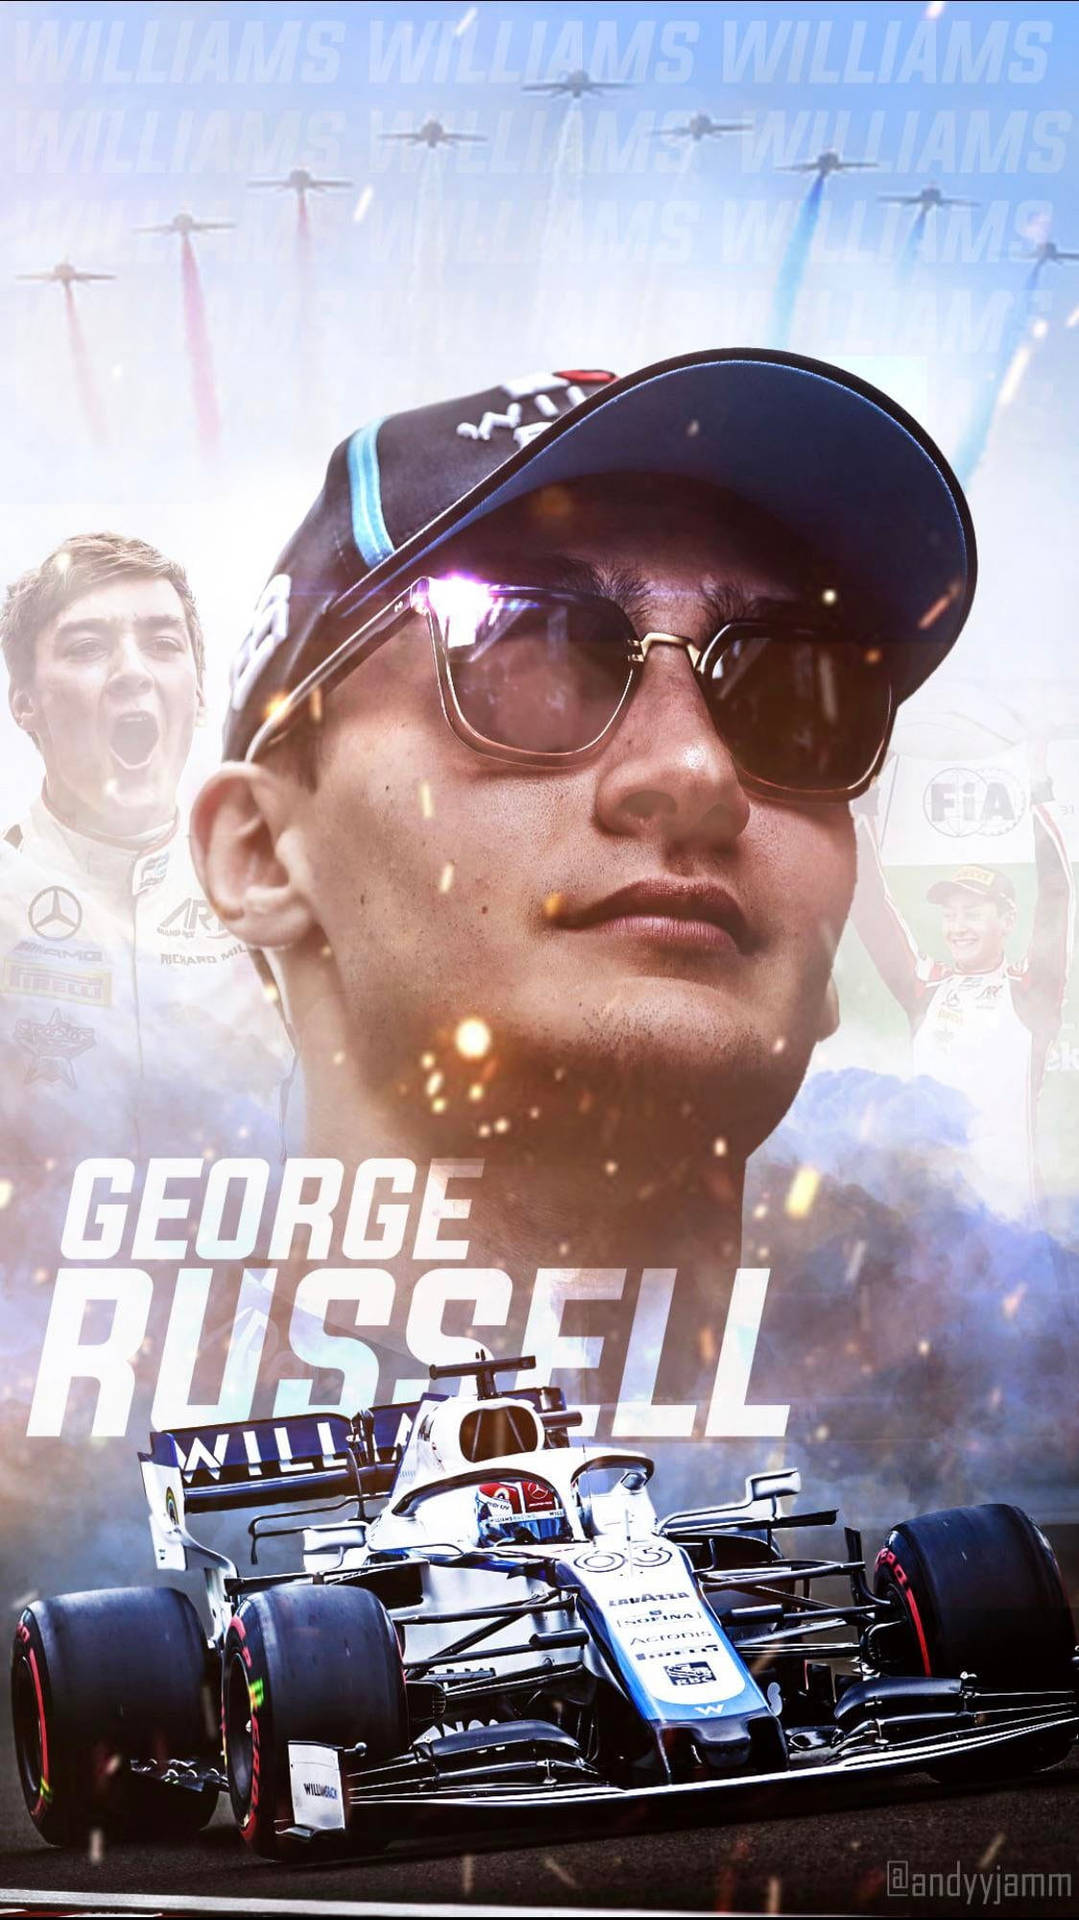 George Russell F1 Fanbearbeitung Wallpaper